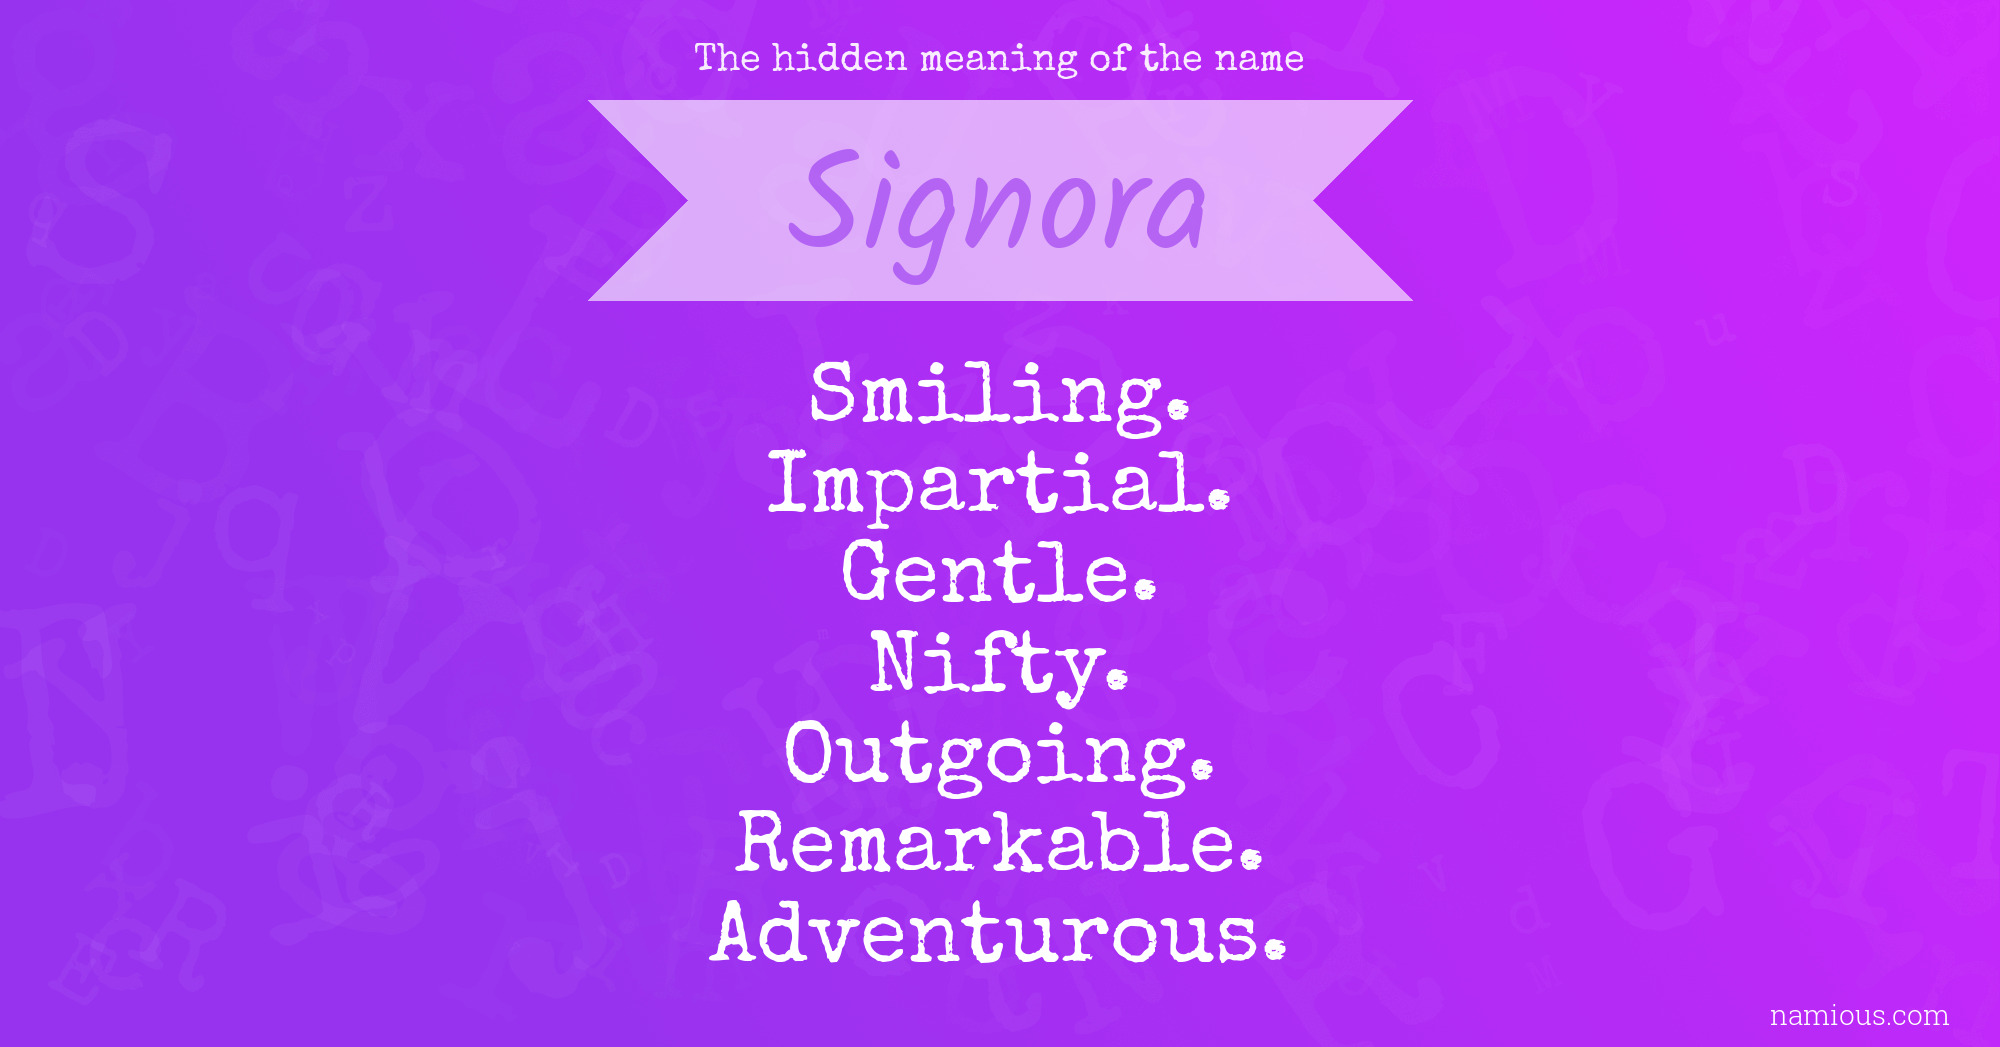 The hidden meaning of the name Signora